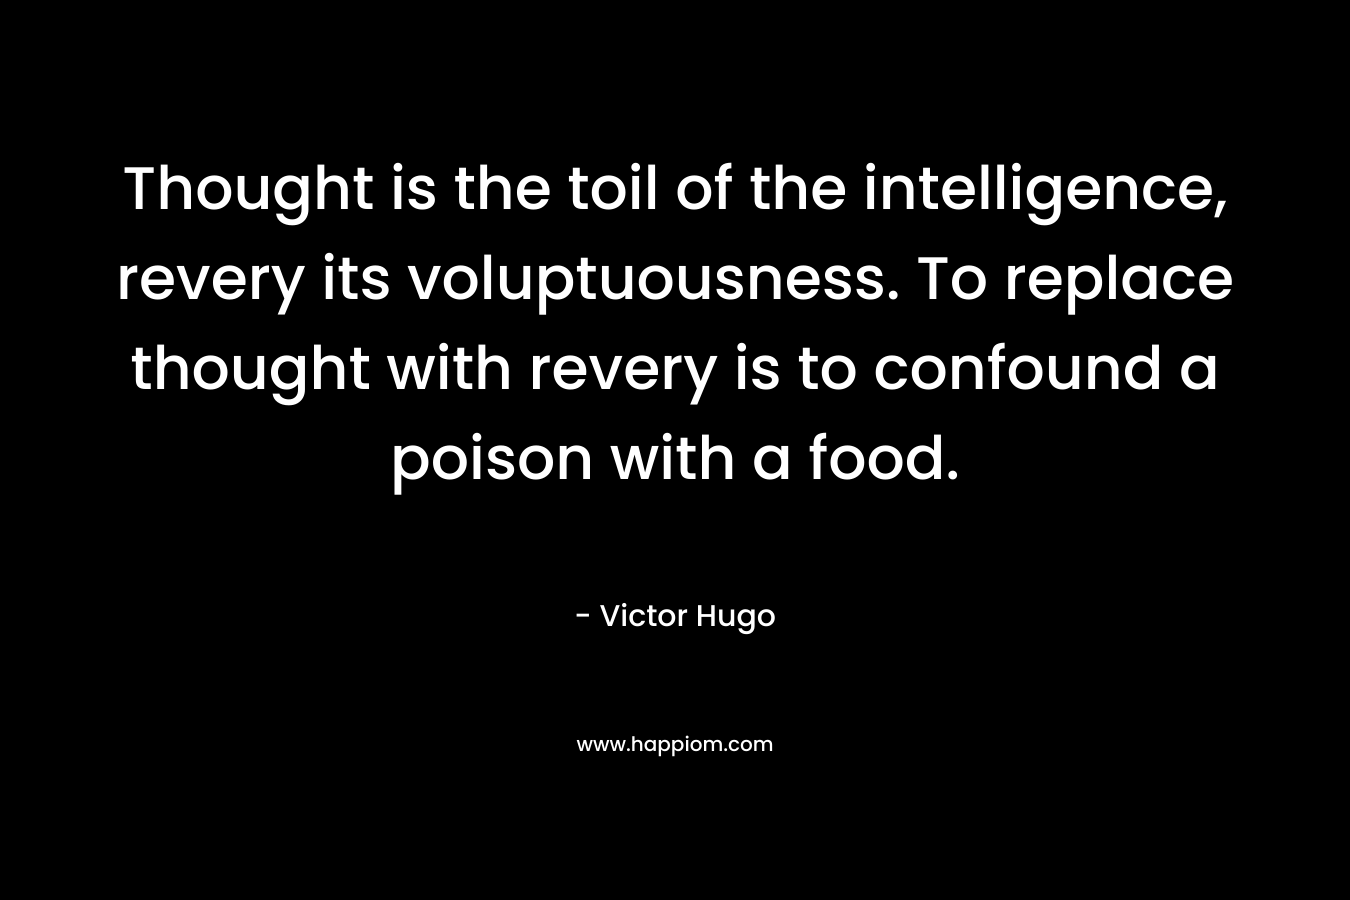 Thought is the toil of the intelligence, revery its voluptuousness. To replace thought with revery is to confound a poison with a food. – Victor Hugo